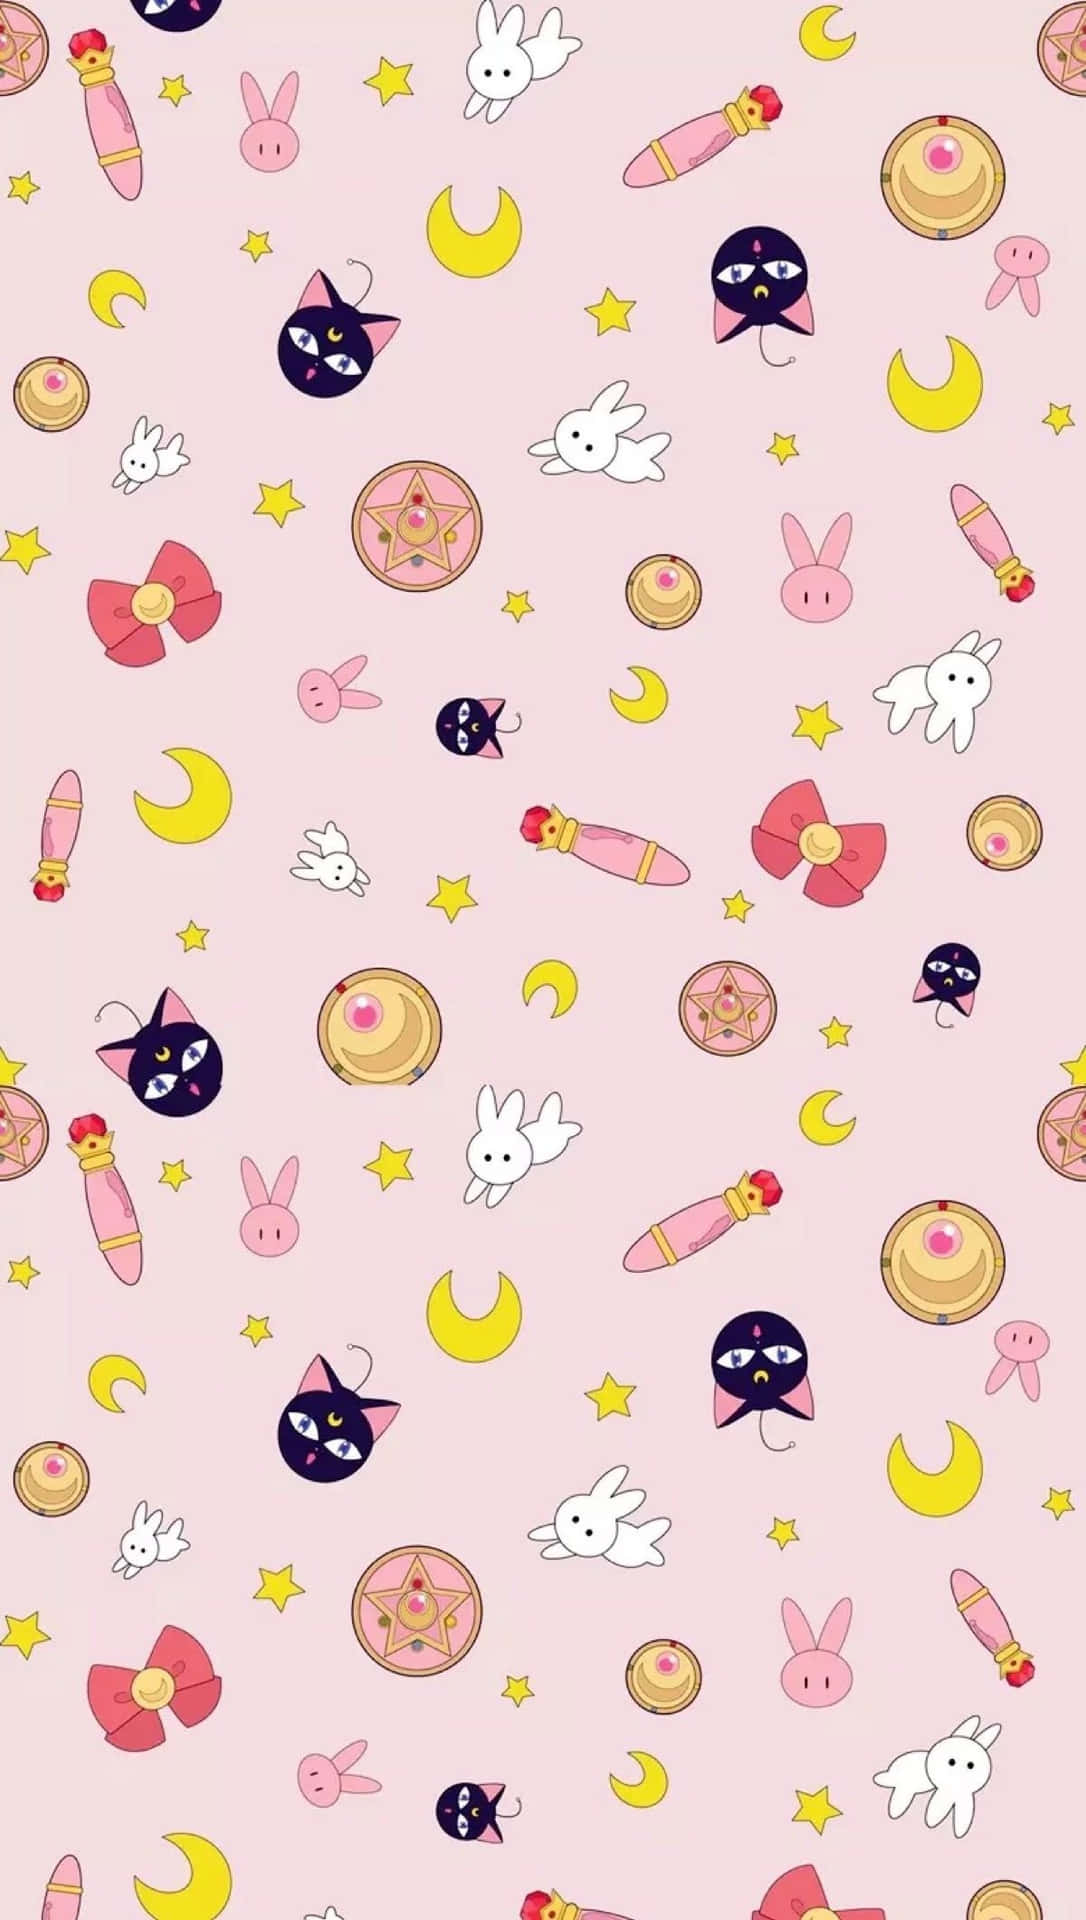 Explore the World of Art with This Sailor Moon-inspired Pattern Wallpaper